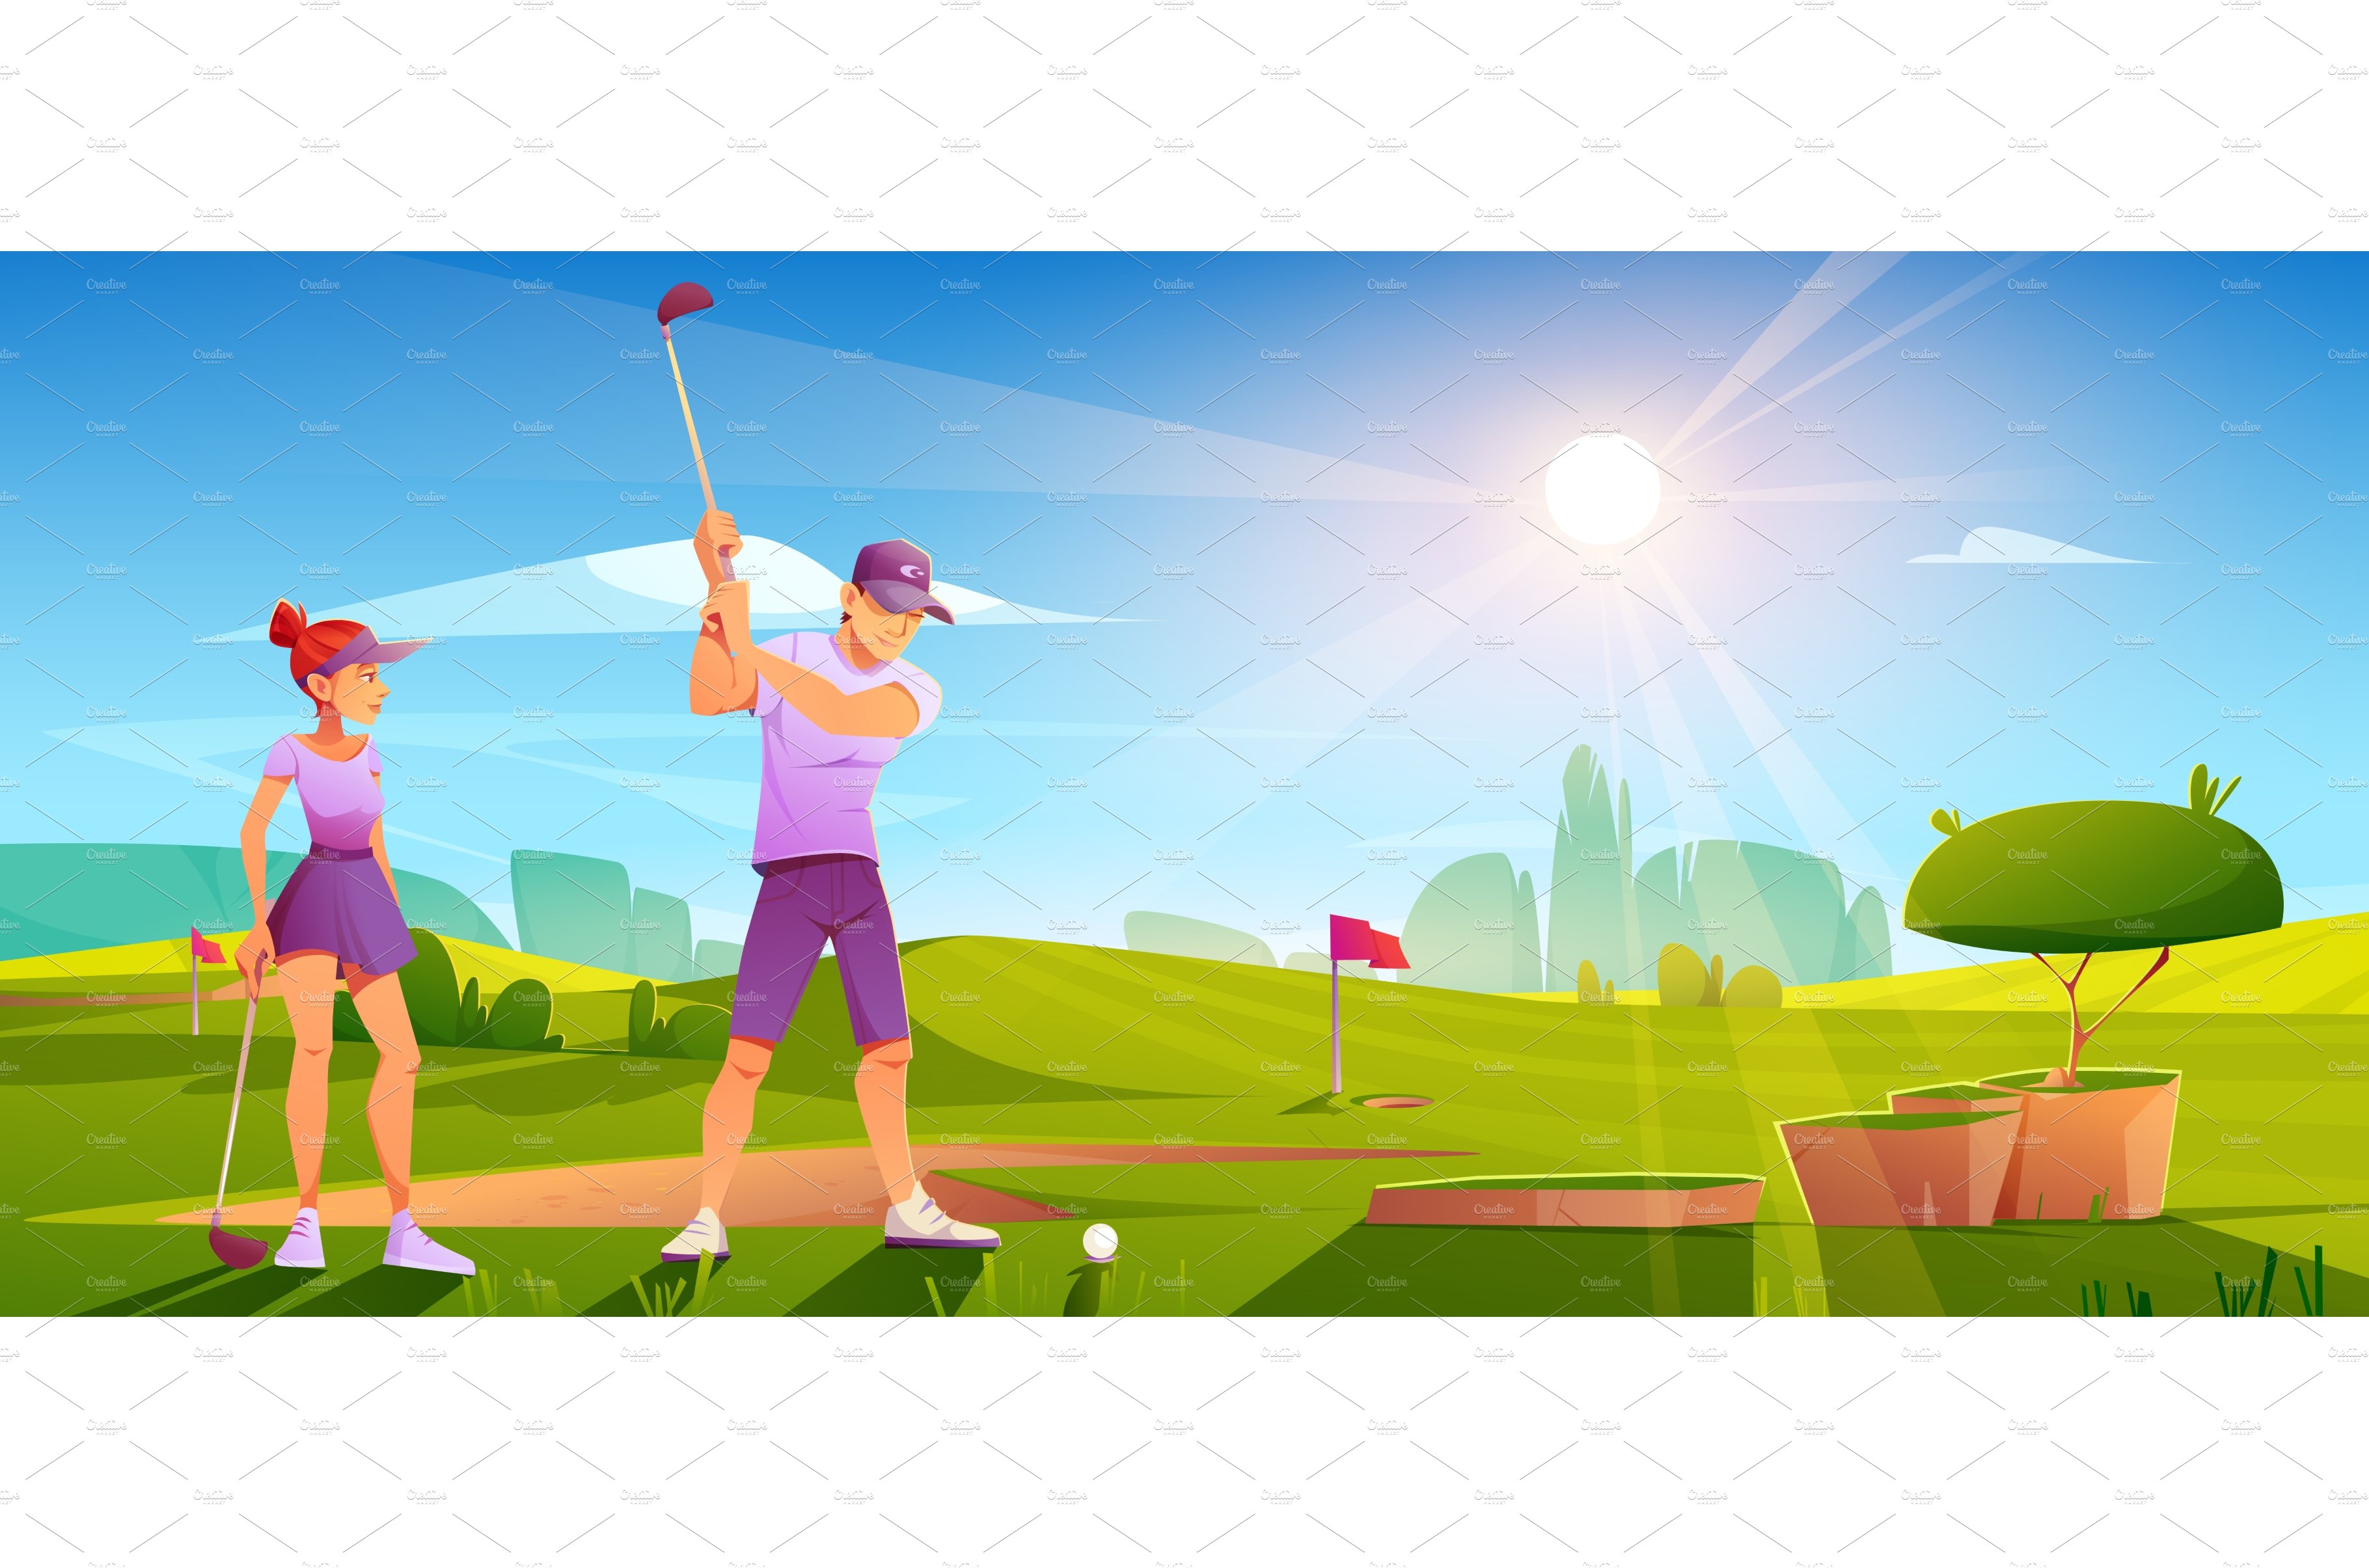 Golfers playing golf on green field cover image.